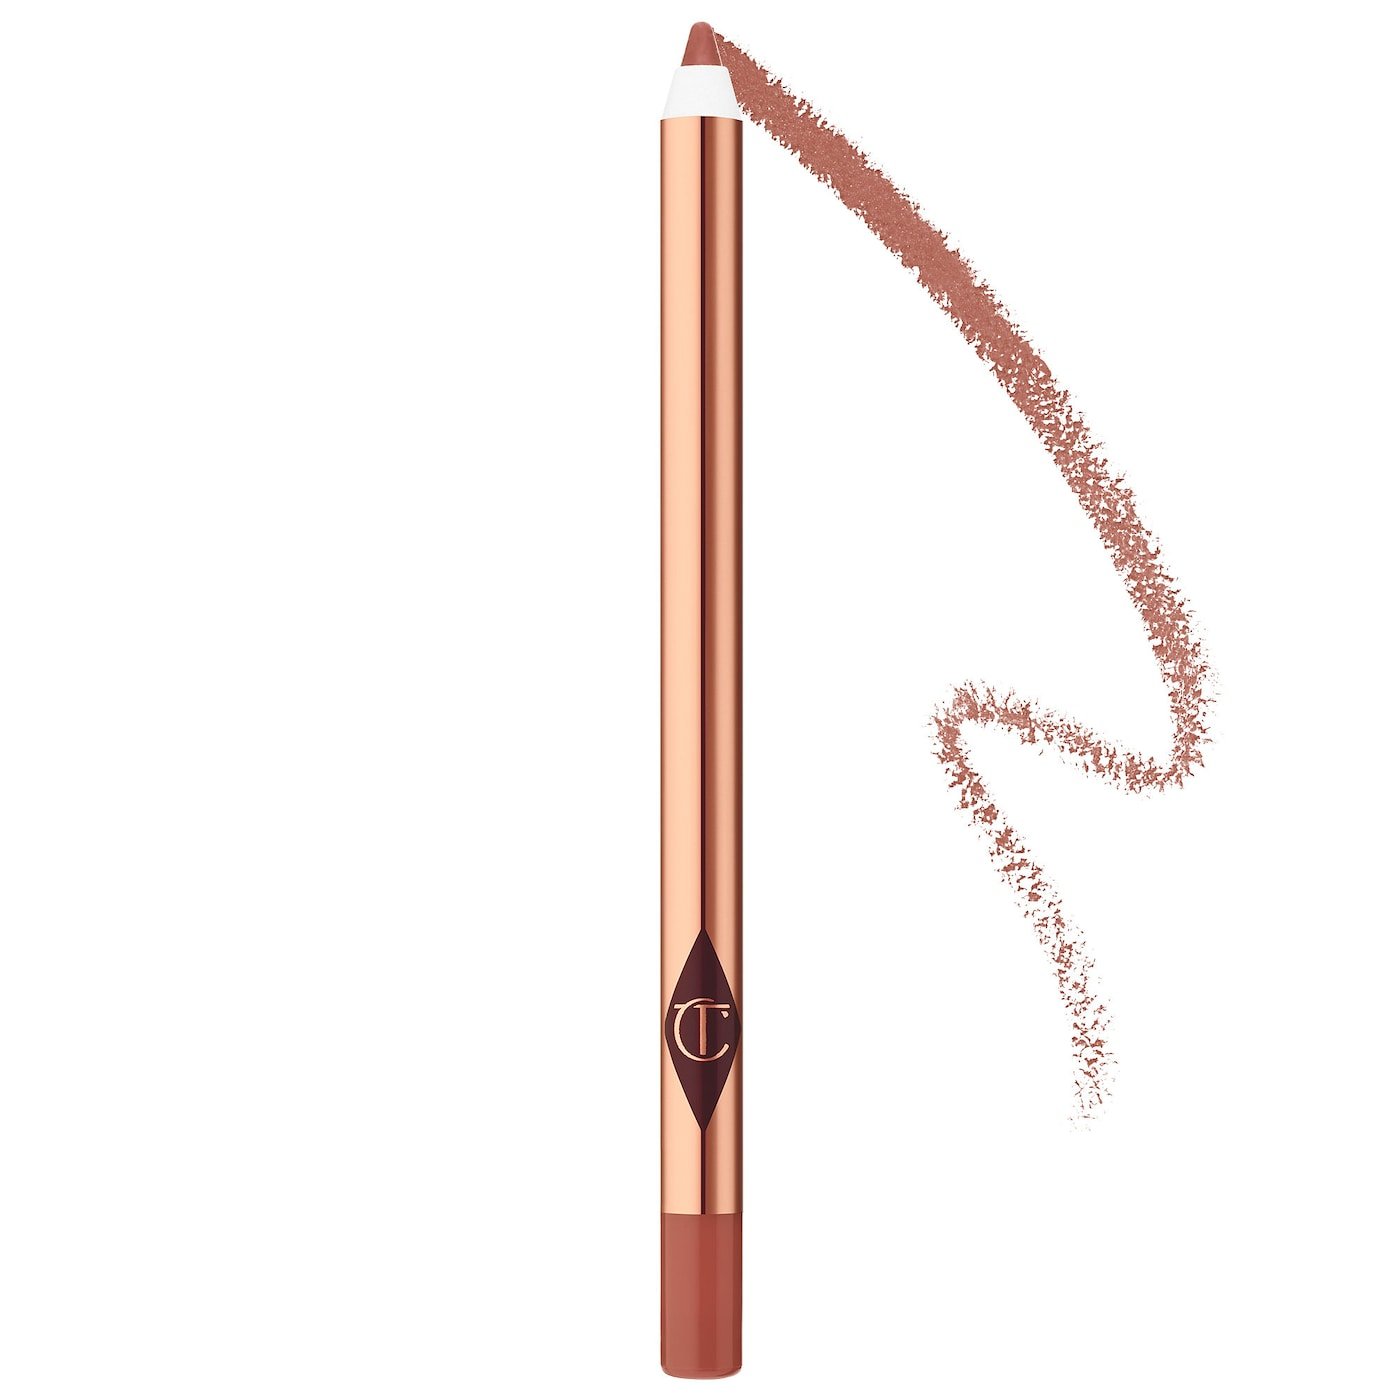 Charlotte Tilbury Pencil in "Pillow Talk" and "Nude"